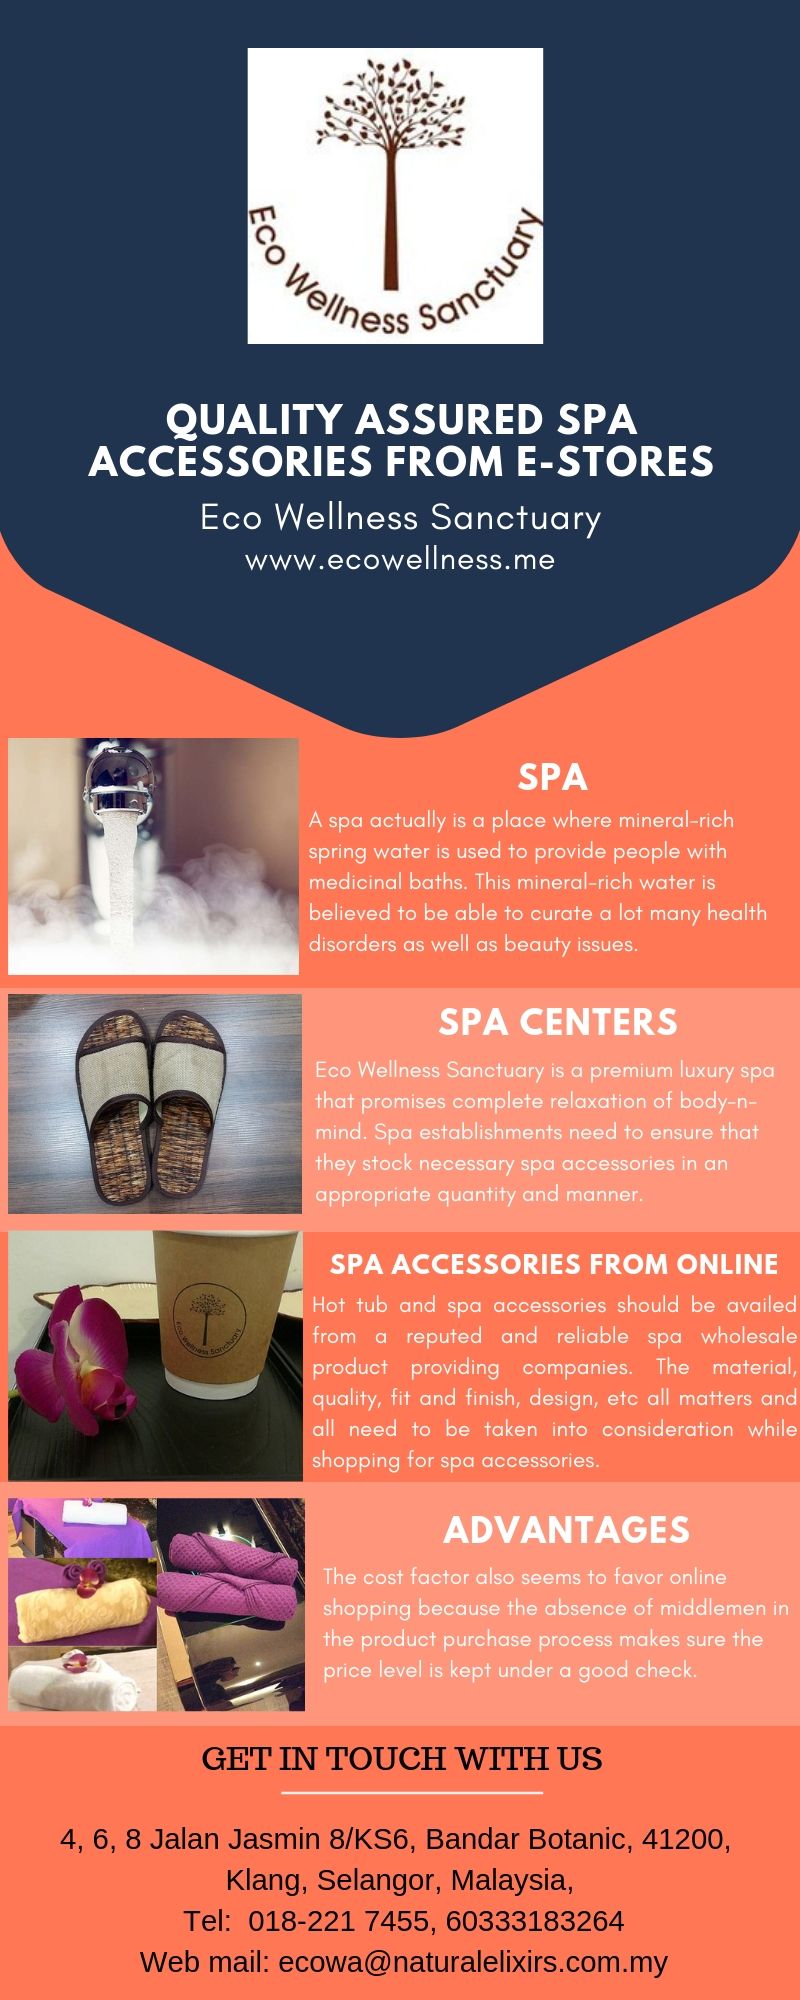 Quality assured spa accessories from e-stores.jpg  by ecowellness15